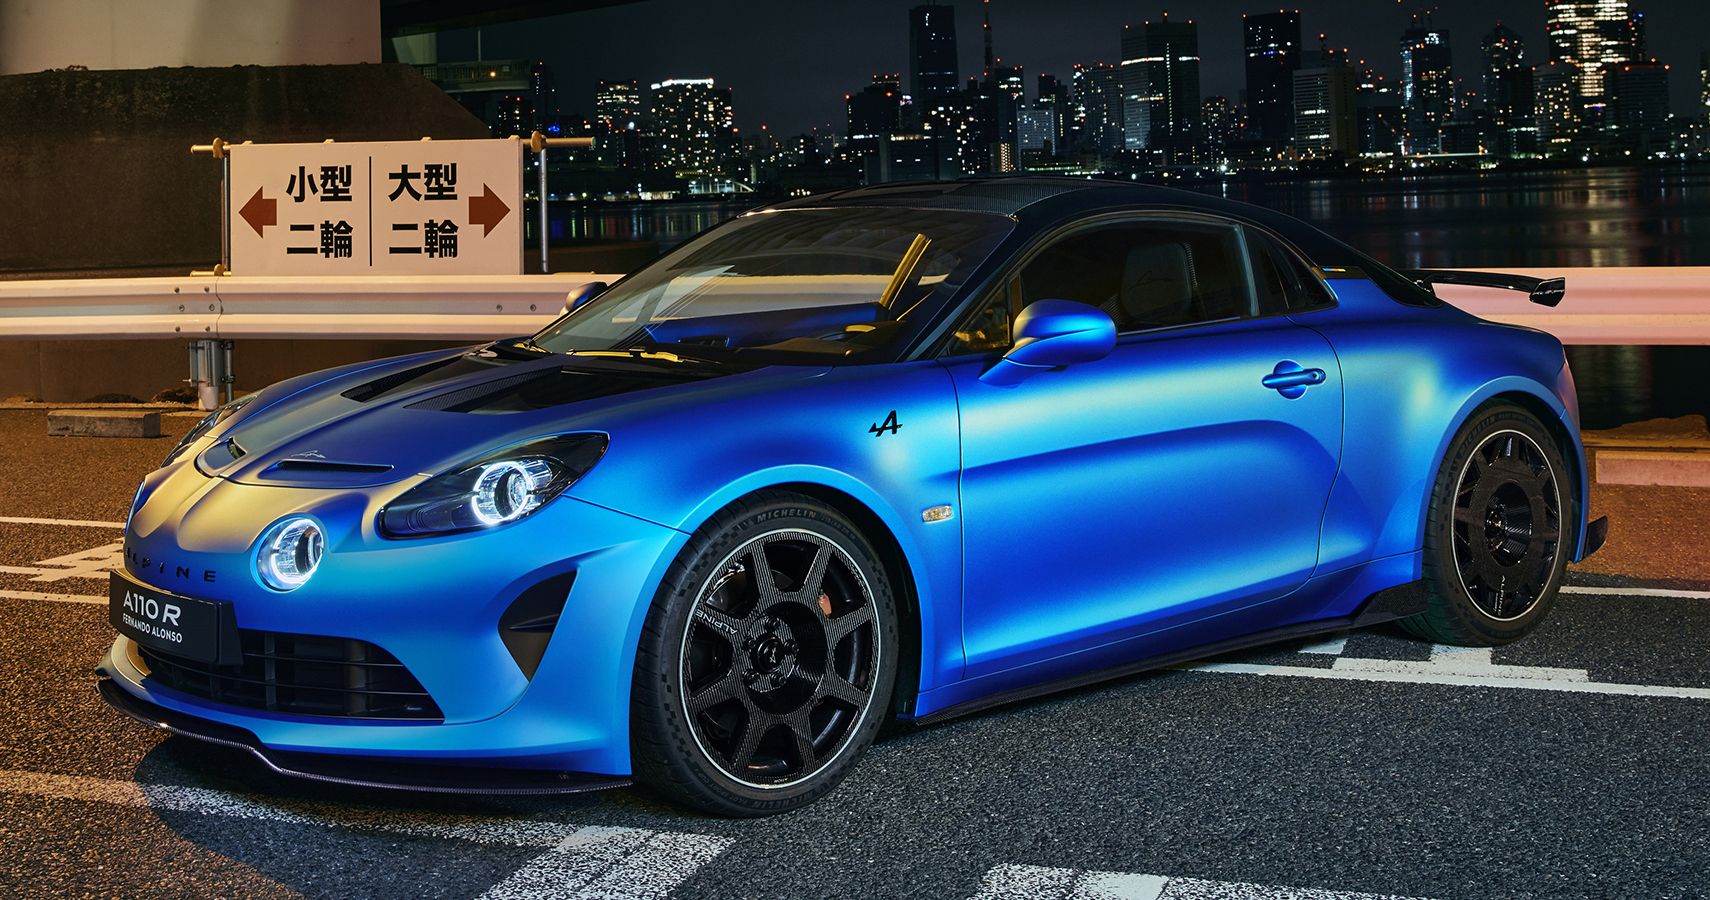 What Sports Car Enthusiasts Should Know About The Alpine A110 R Fernando Alonso Edition